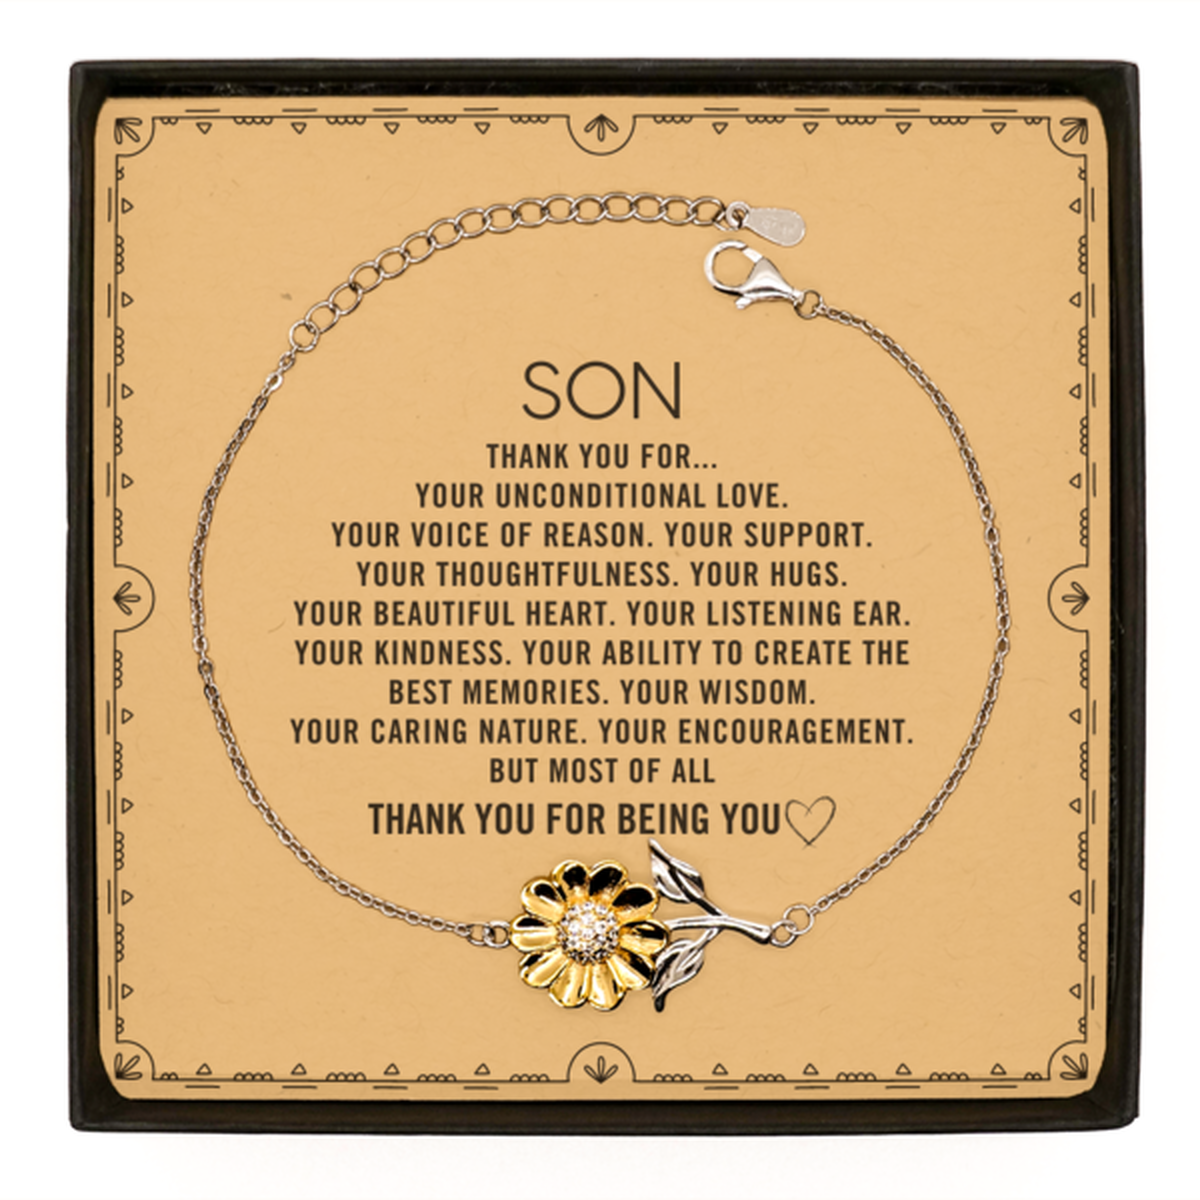 Son Sunflower Bracelet Custom, Message Card Gifts For Son Christmas Graduation Birthday Gifts for Men Women Son Thank you for Your unconditional love